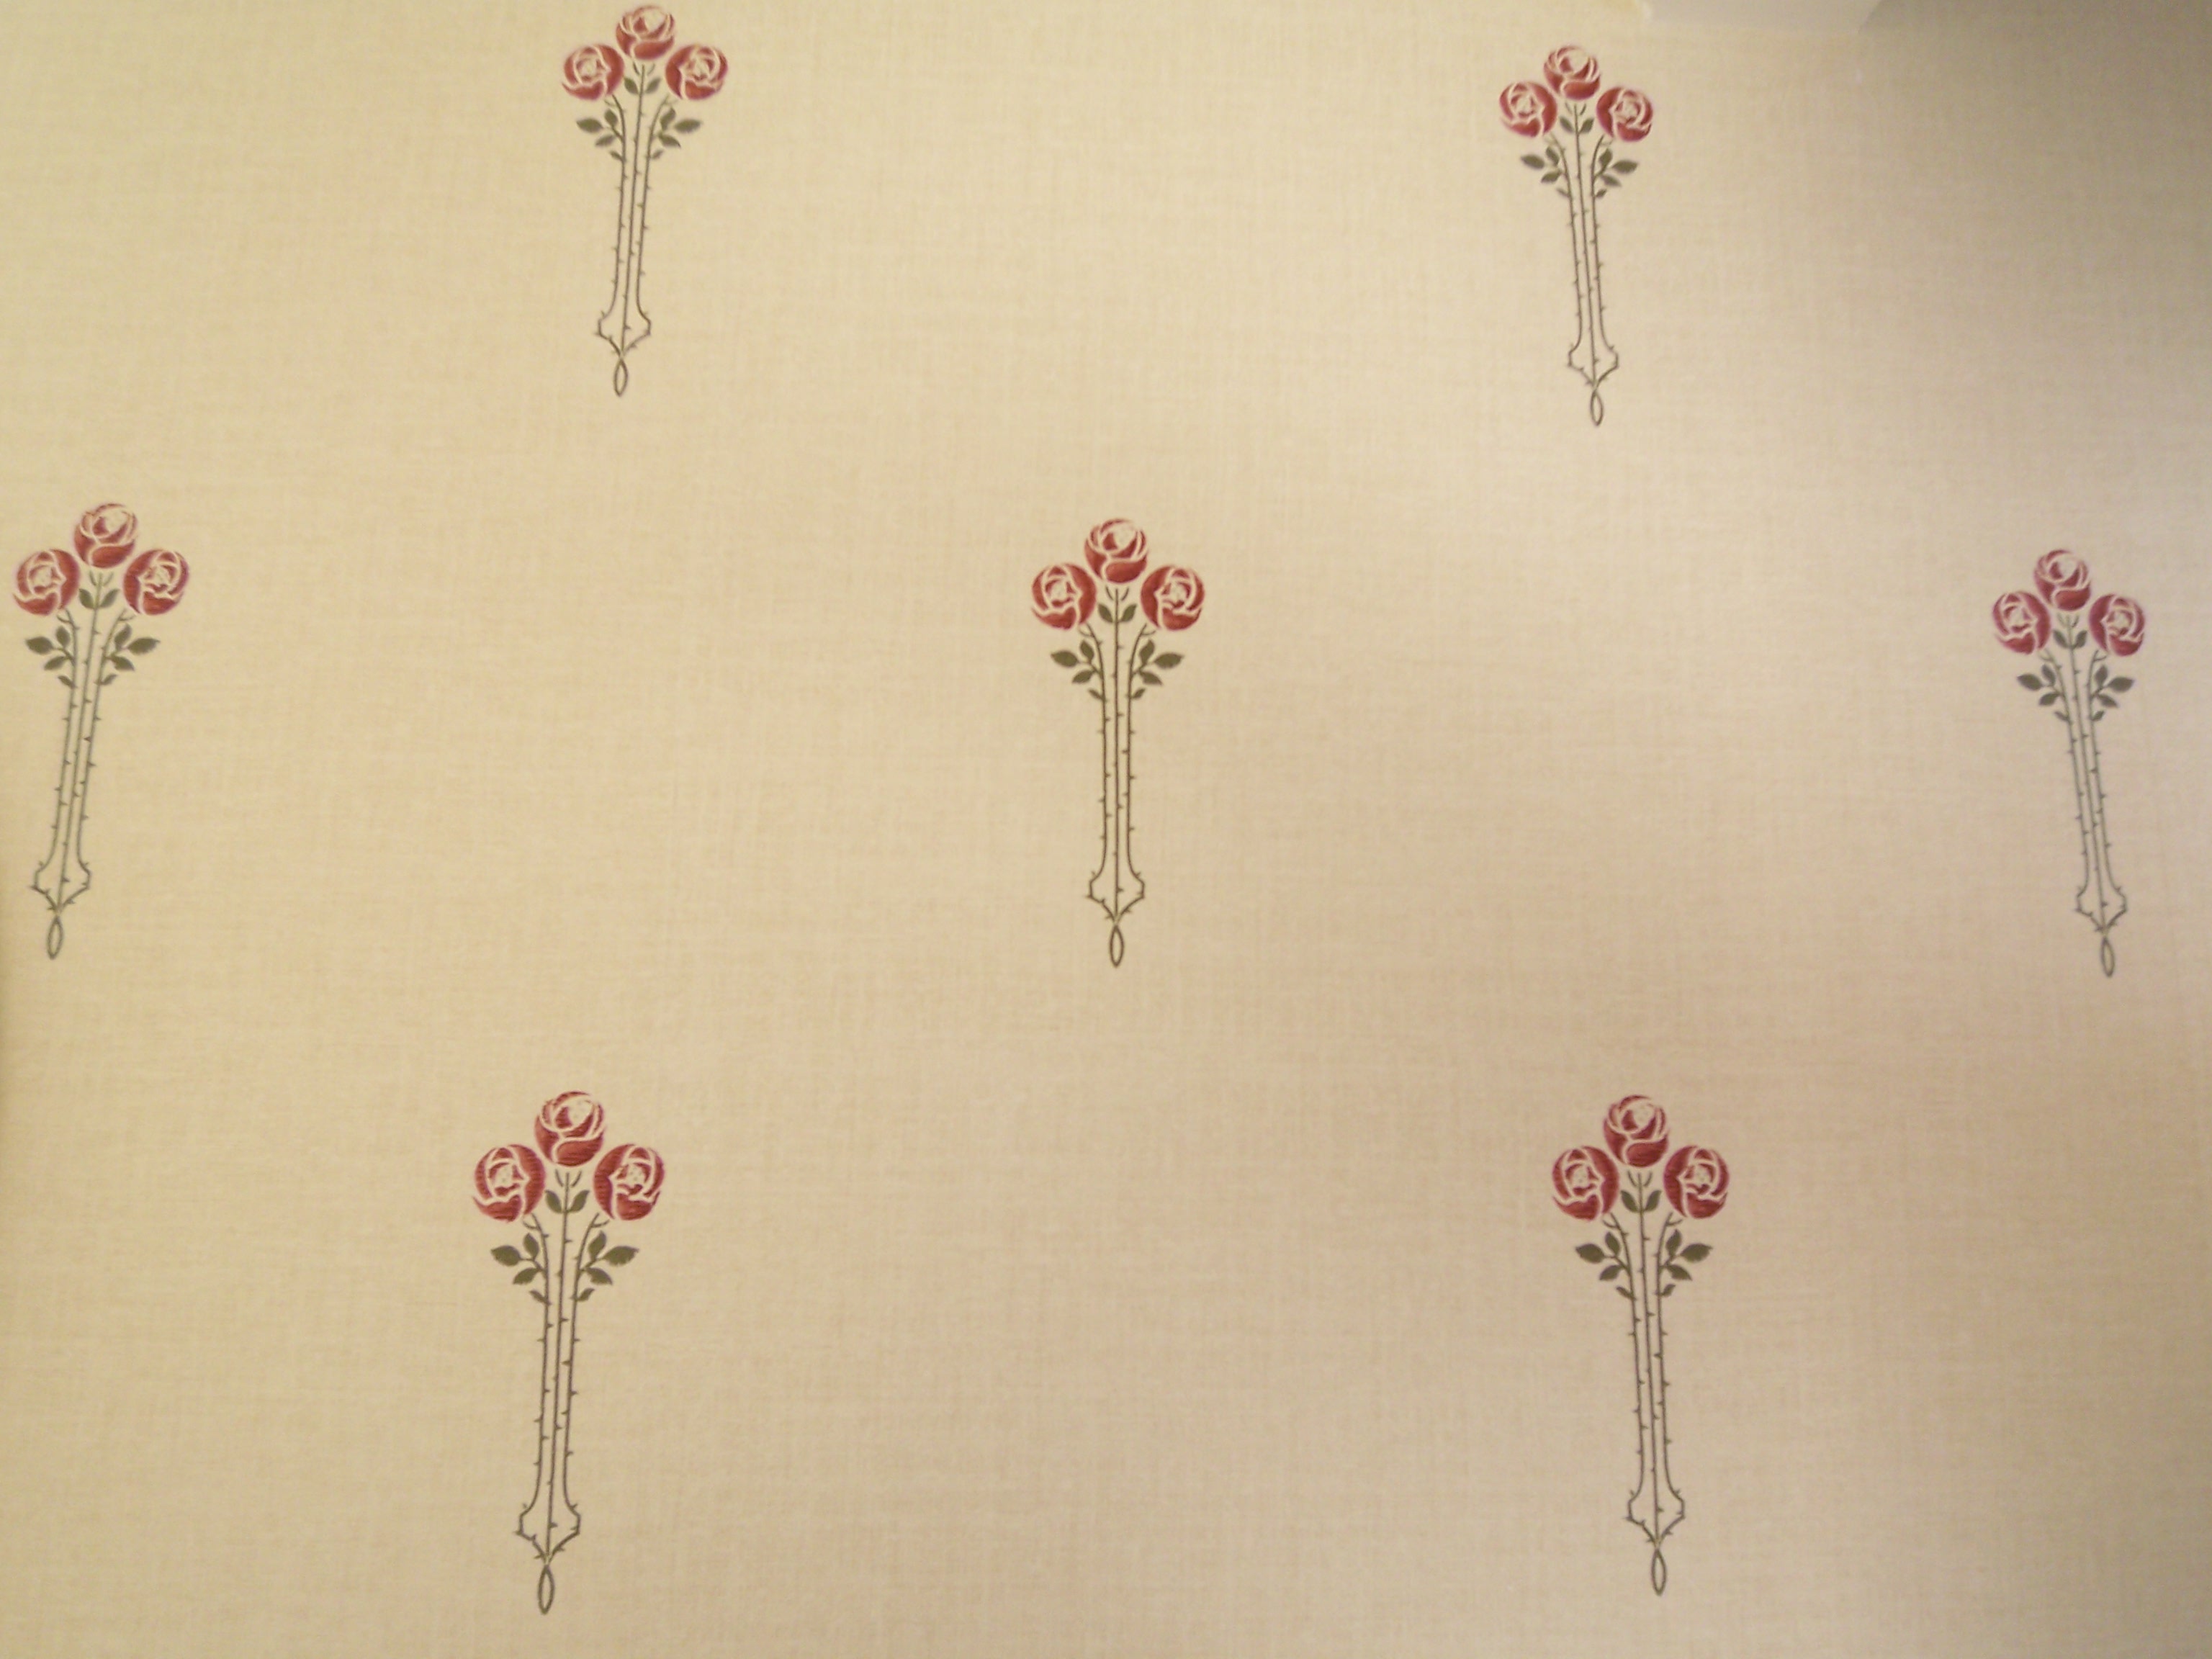 DETAIL ARTS AND CRAFTS REPRODUCTION WALLPAPER tHE dARD rOSE 3072x2304